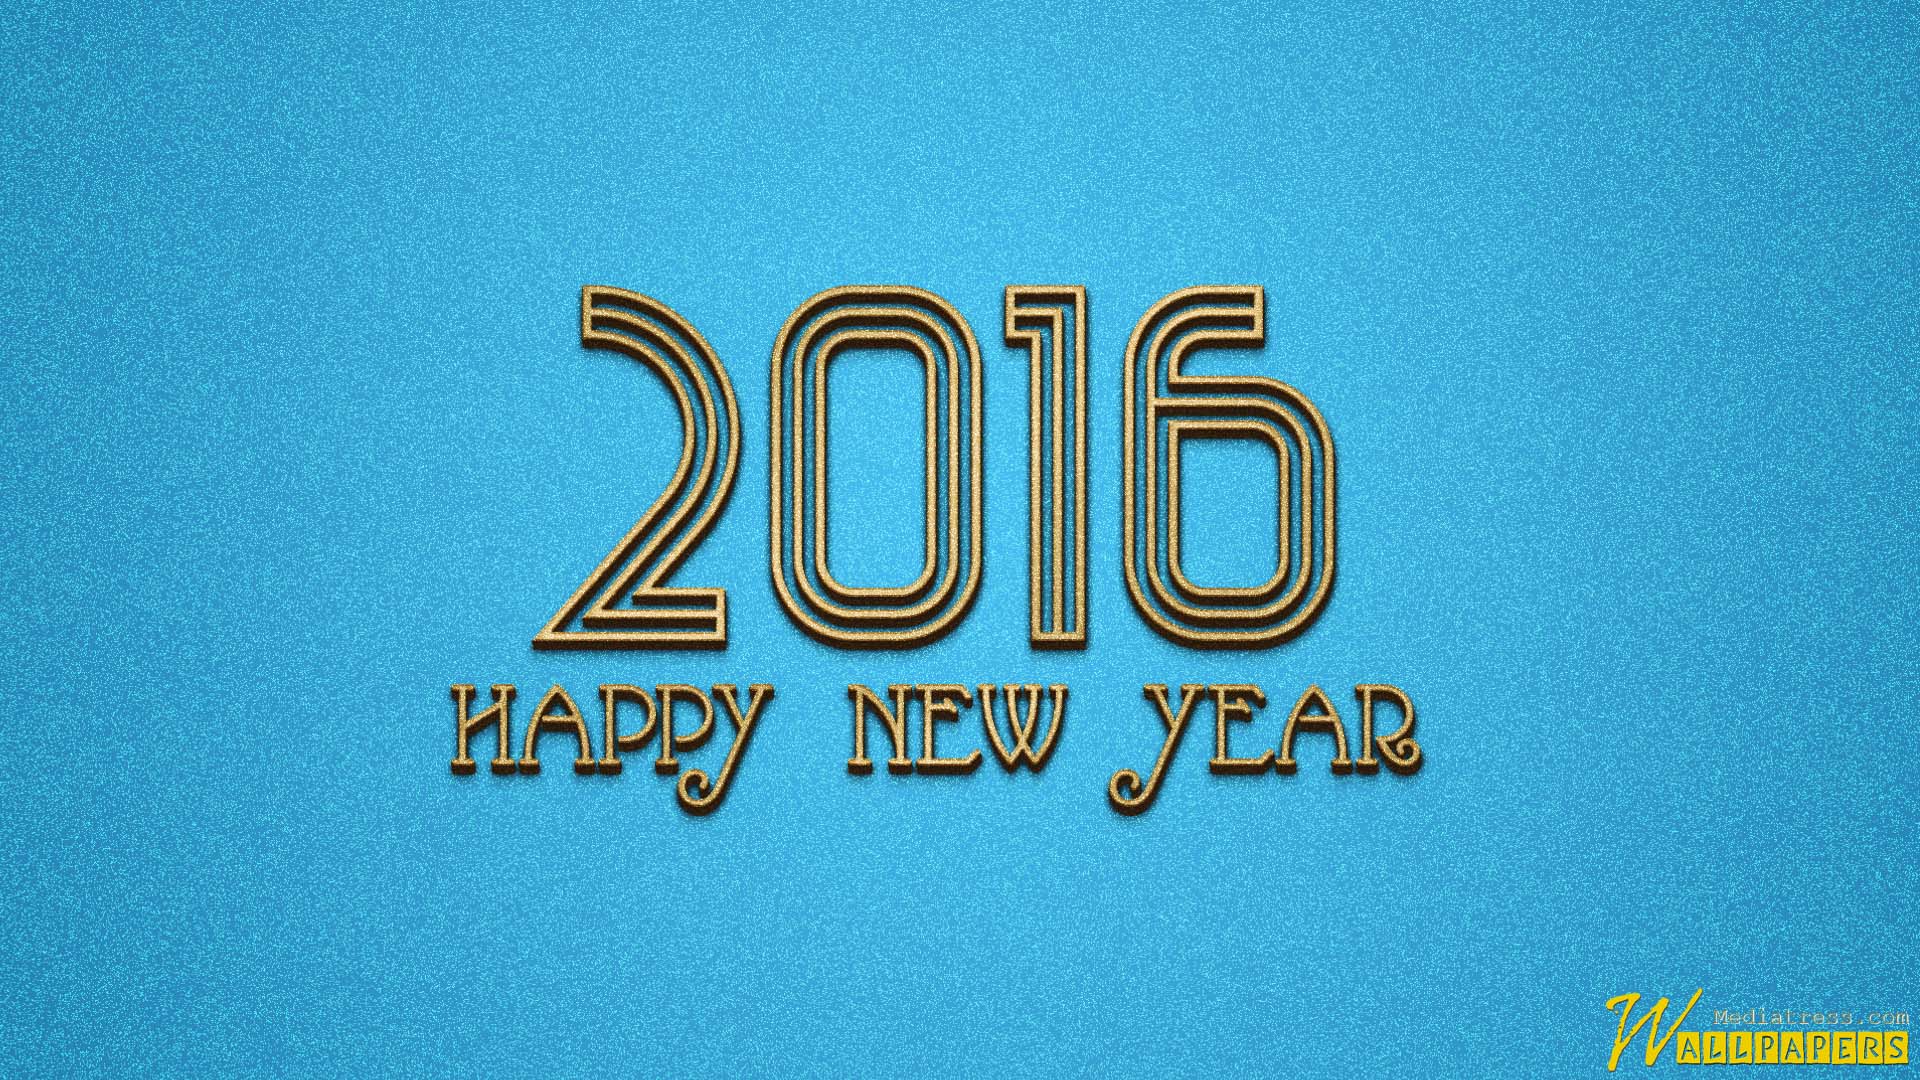 Happy New Year Eve 2016 Wallpapers